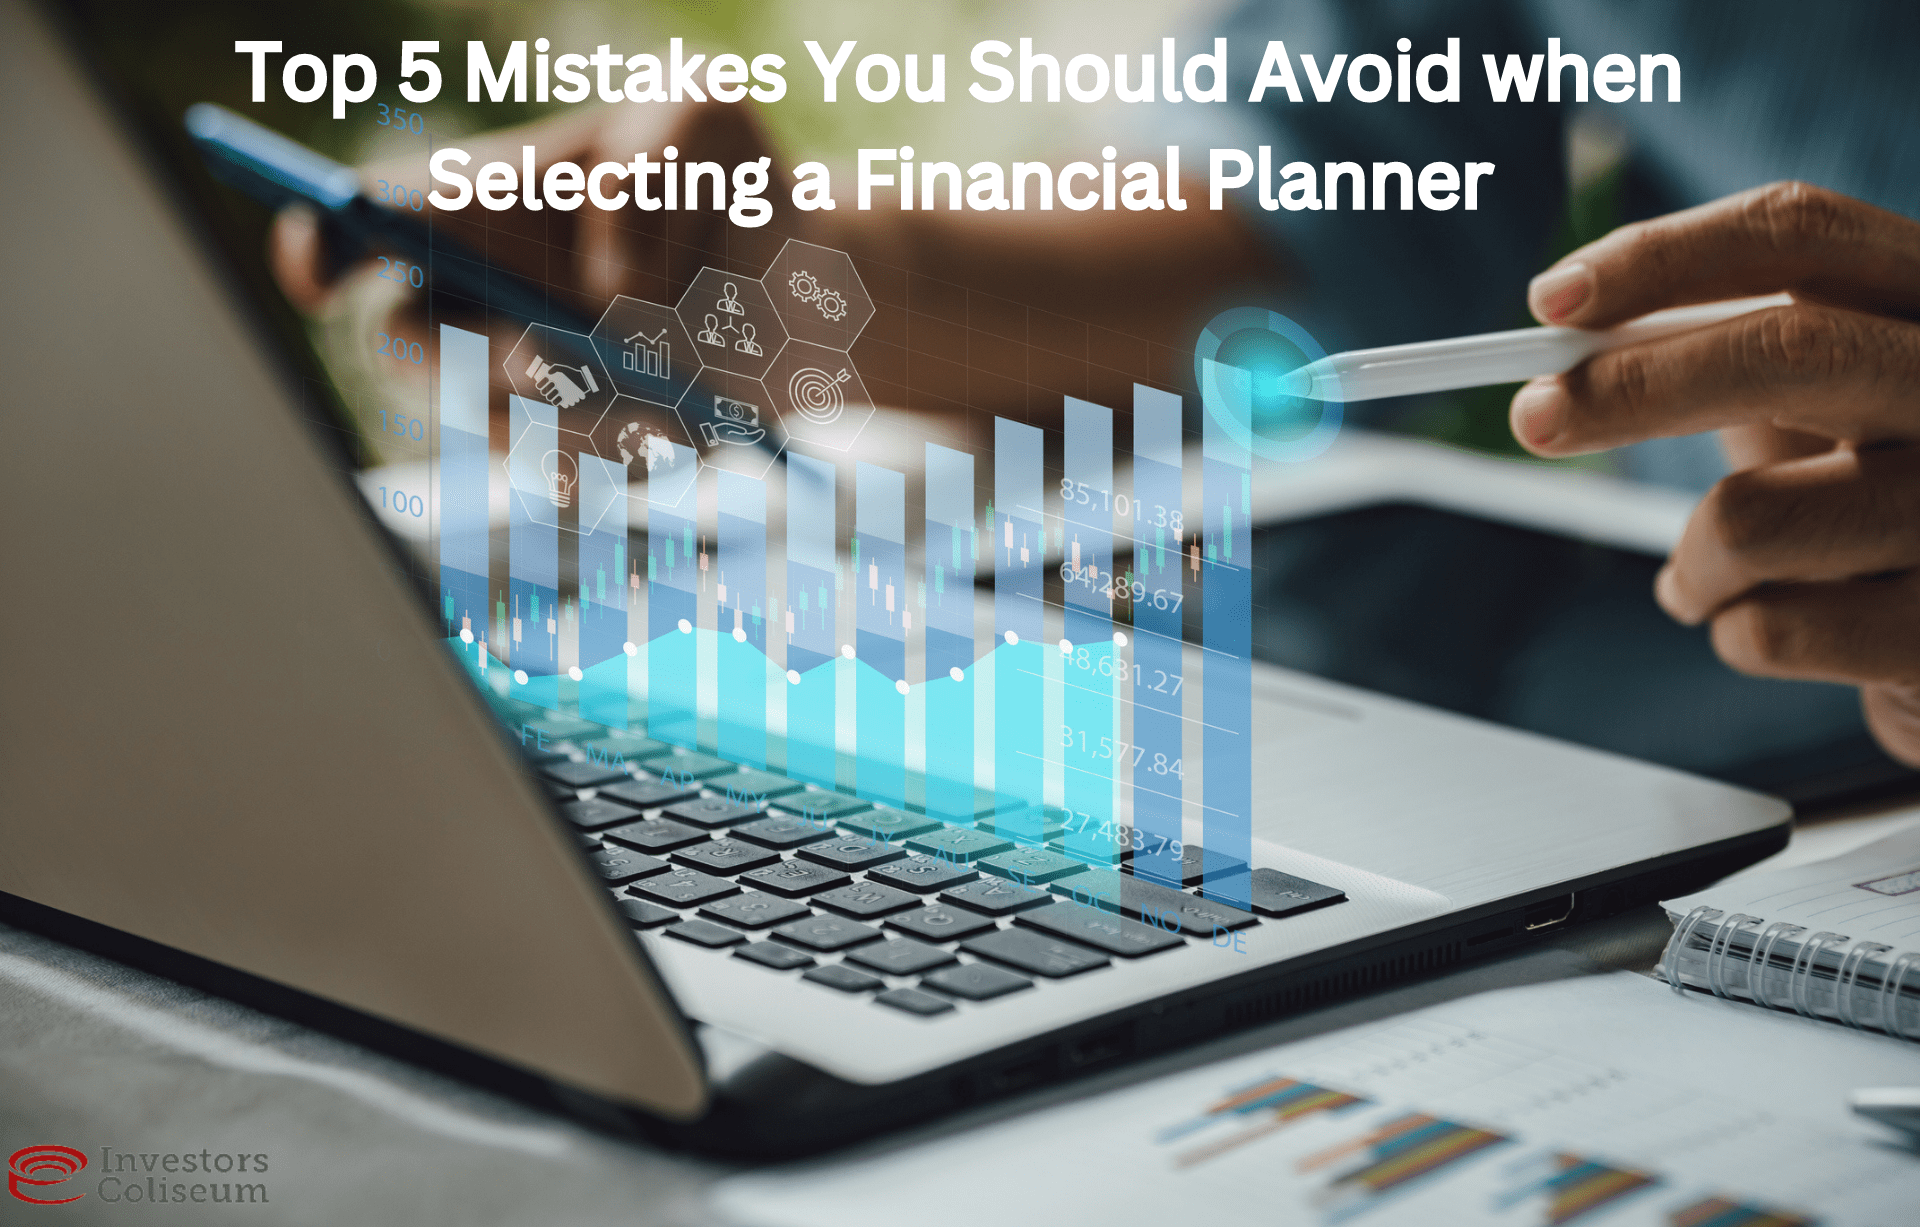 Top 5 Mistakes You Should Avoid When Selecting a Financial Planner